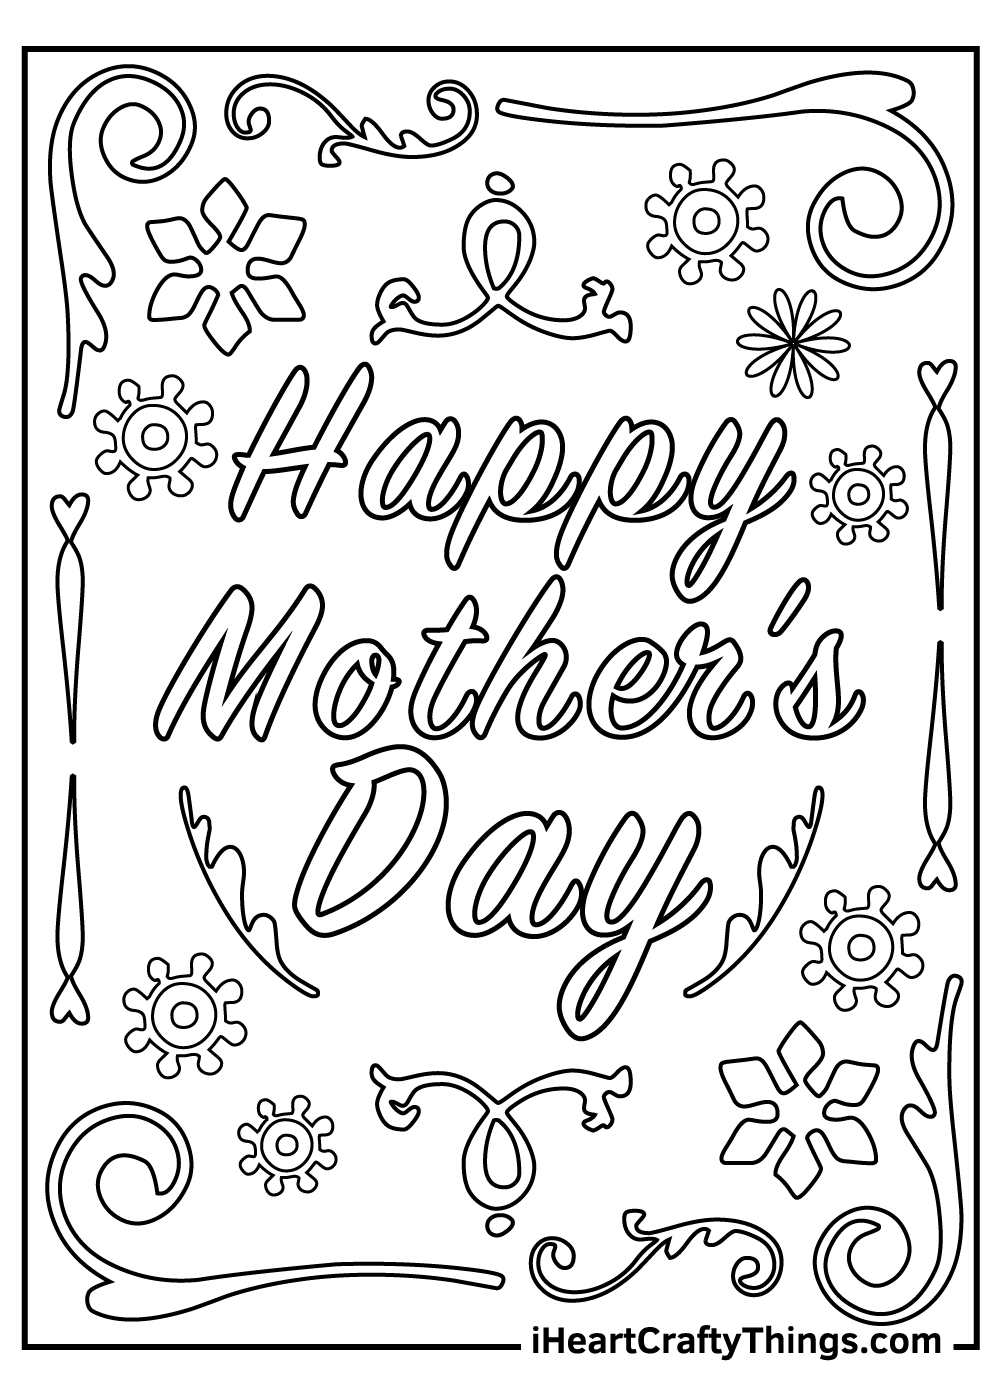 Mothers day coloring pages free printables